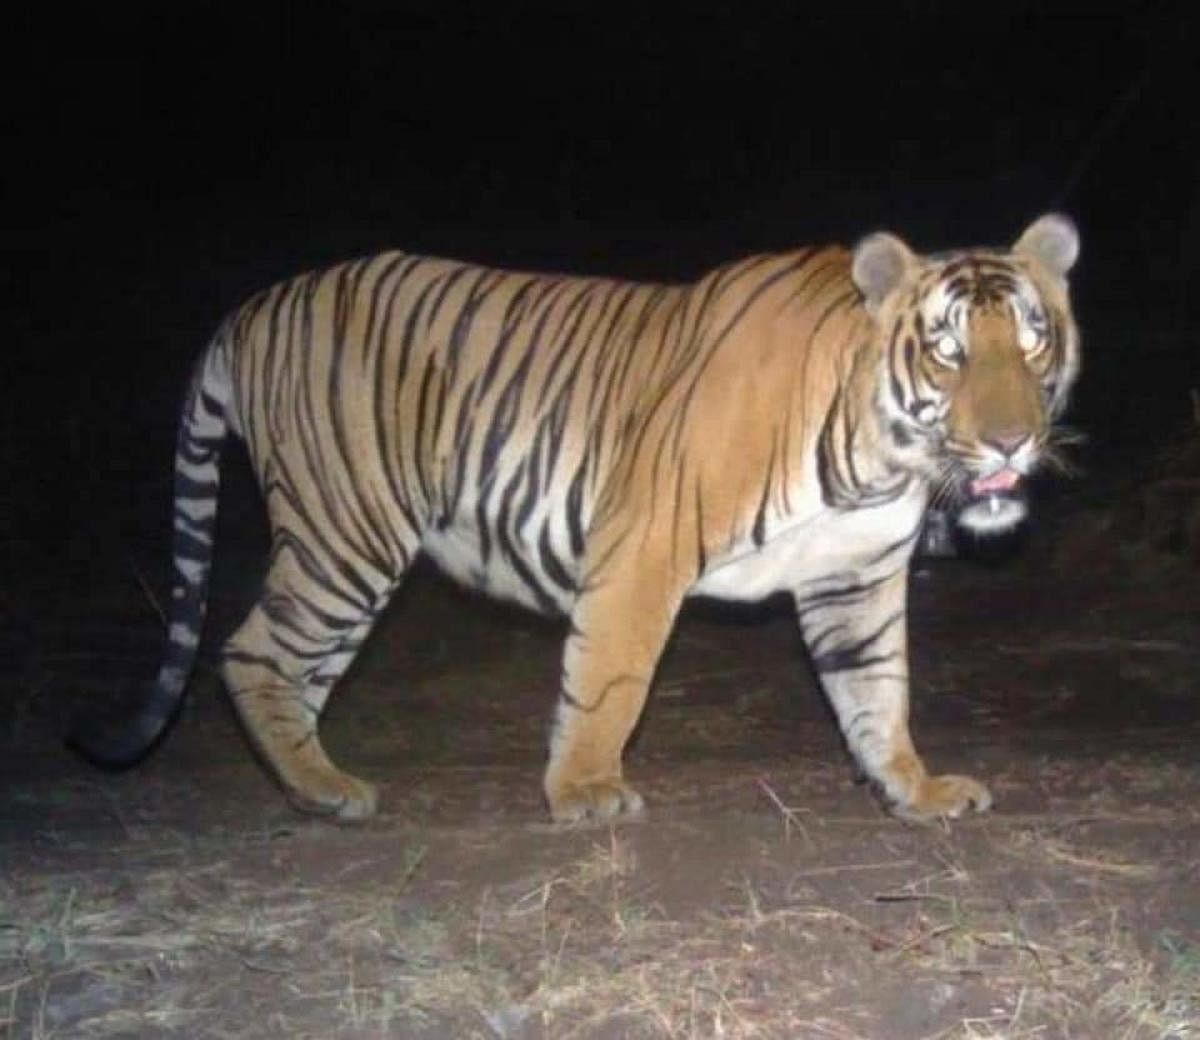 Two photographs are of same animal, clarifies Tiger Cell